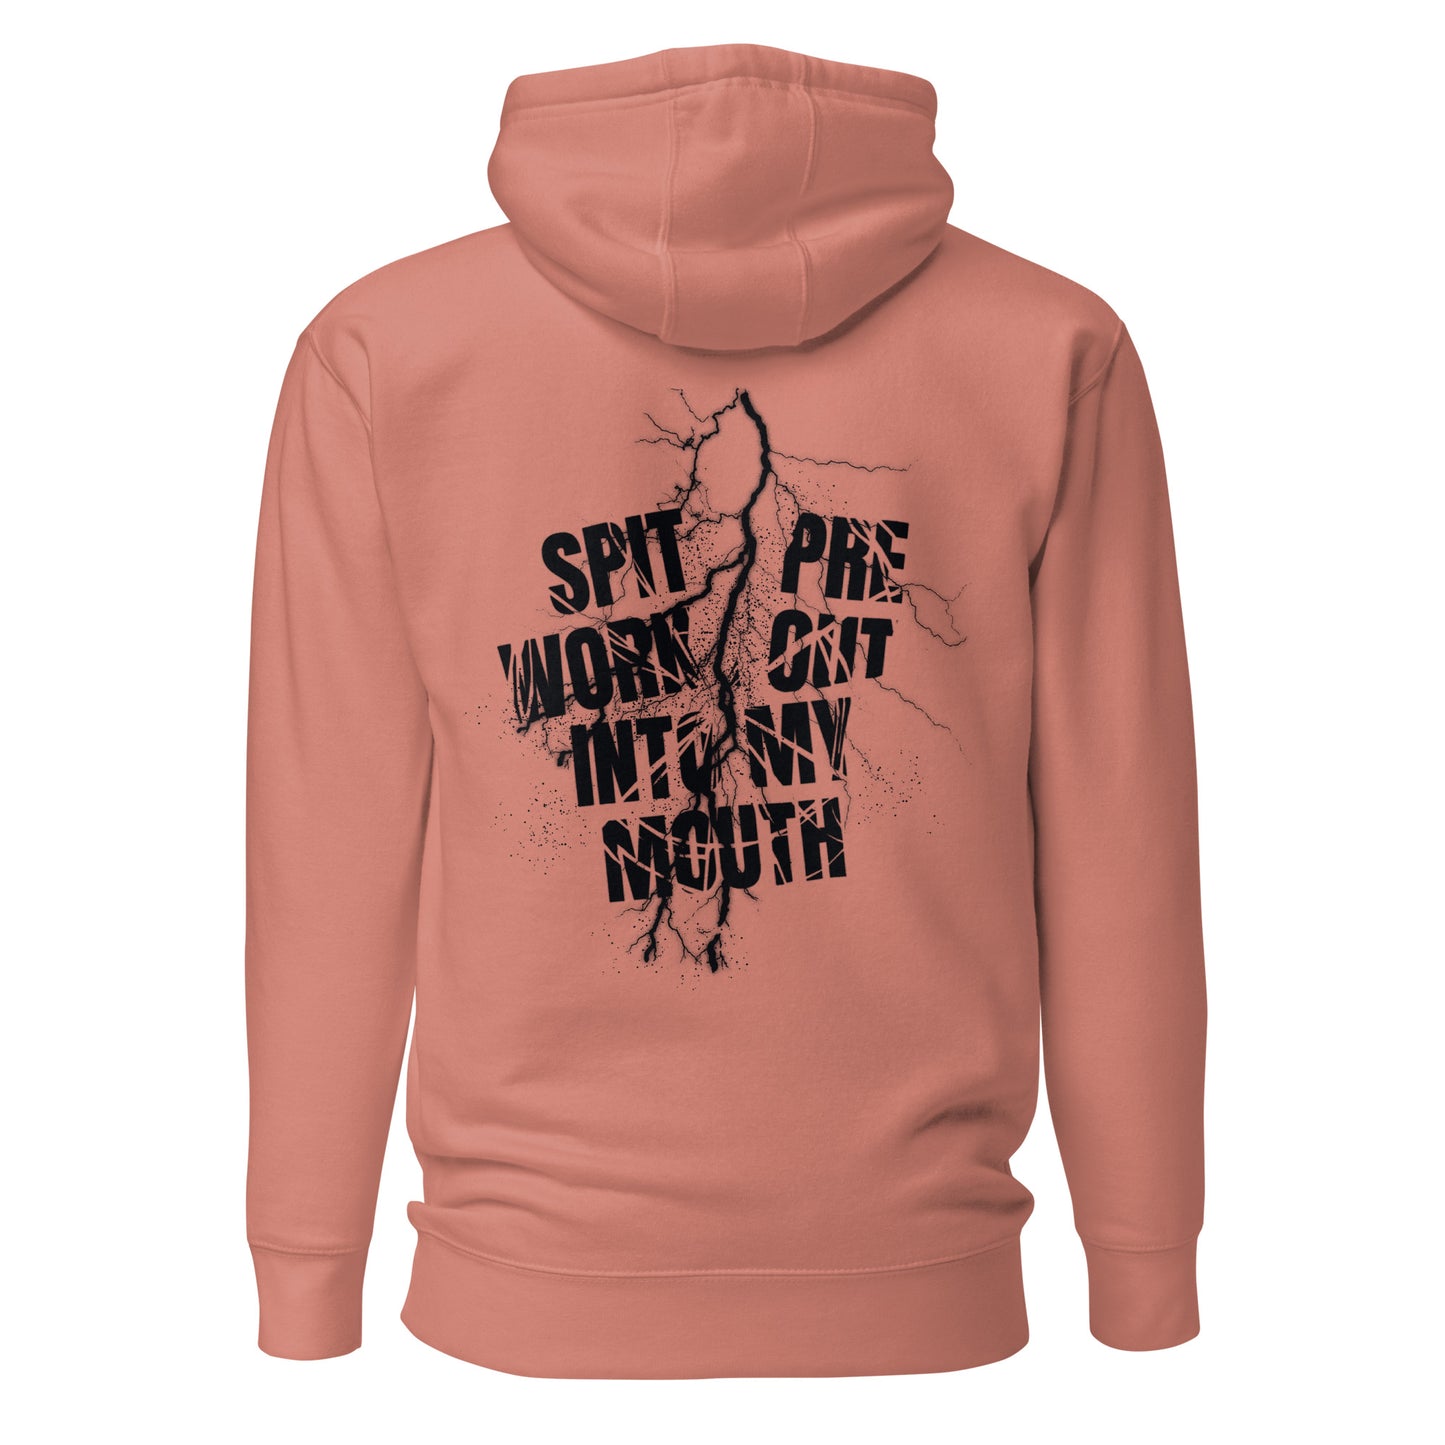 Spit Pre Workout Into My Mouth (Back) Unisex Hoodie